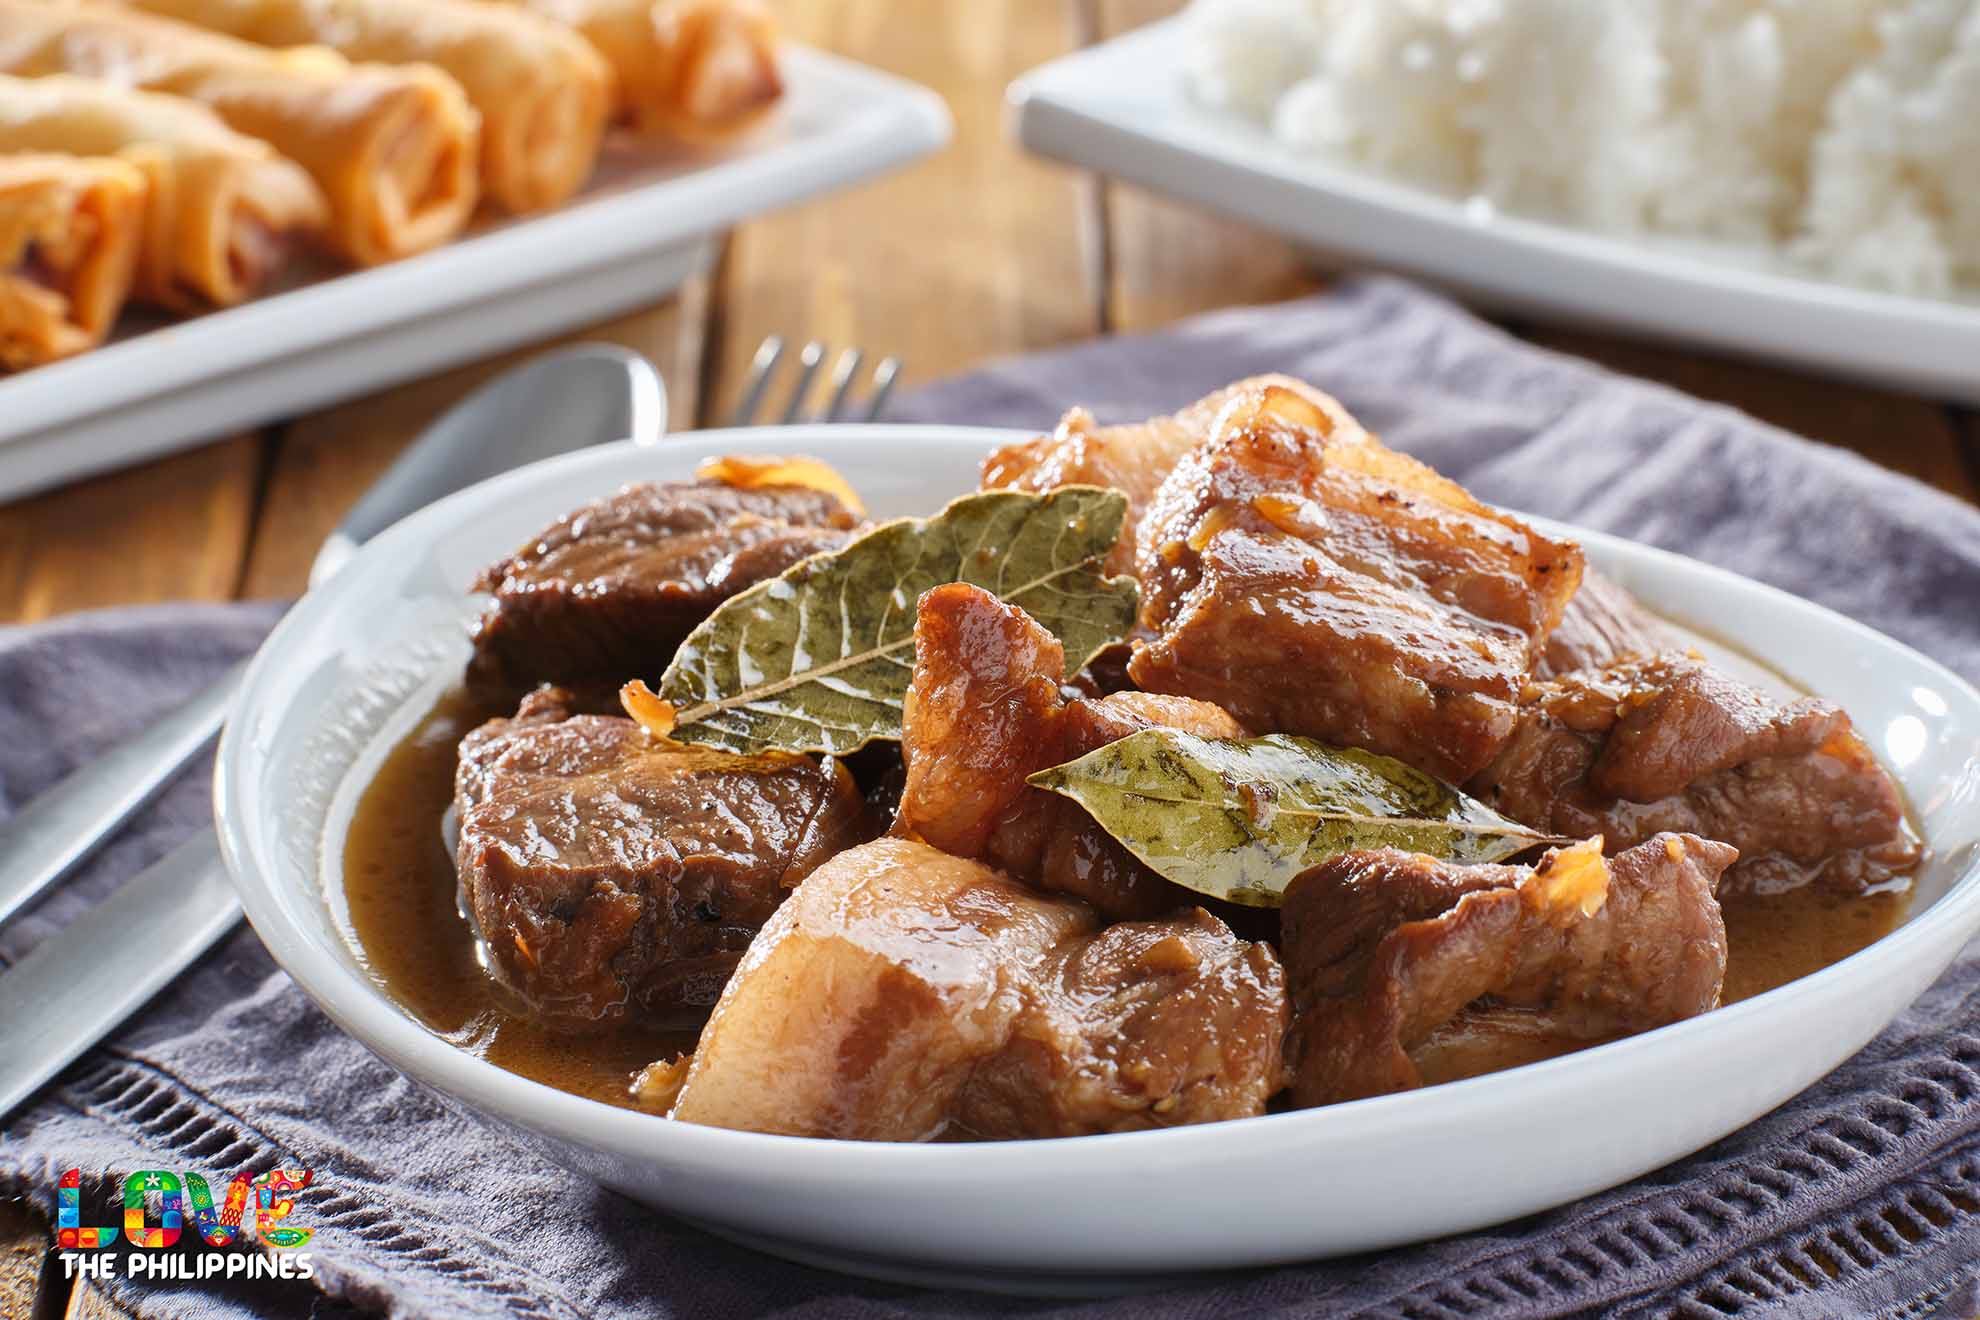 Pork Adobo is made with succulent pork belly braised in vinegar, soy sauce, garlic, and onions.